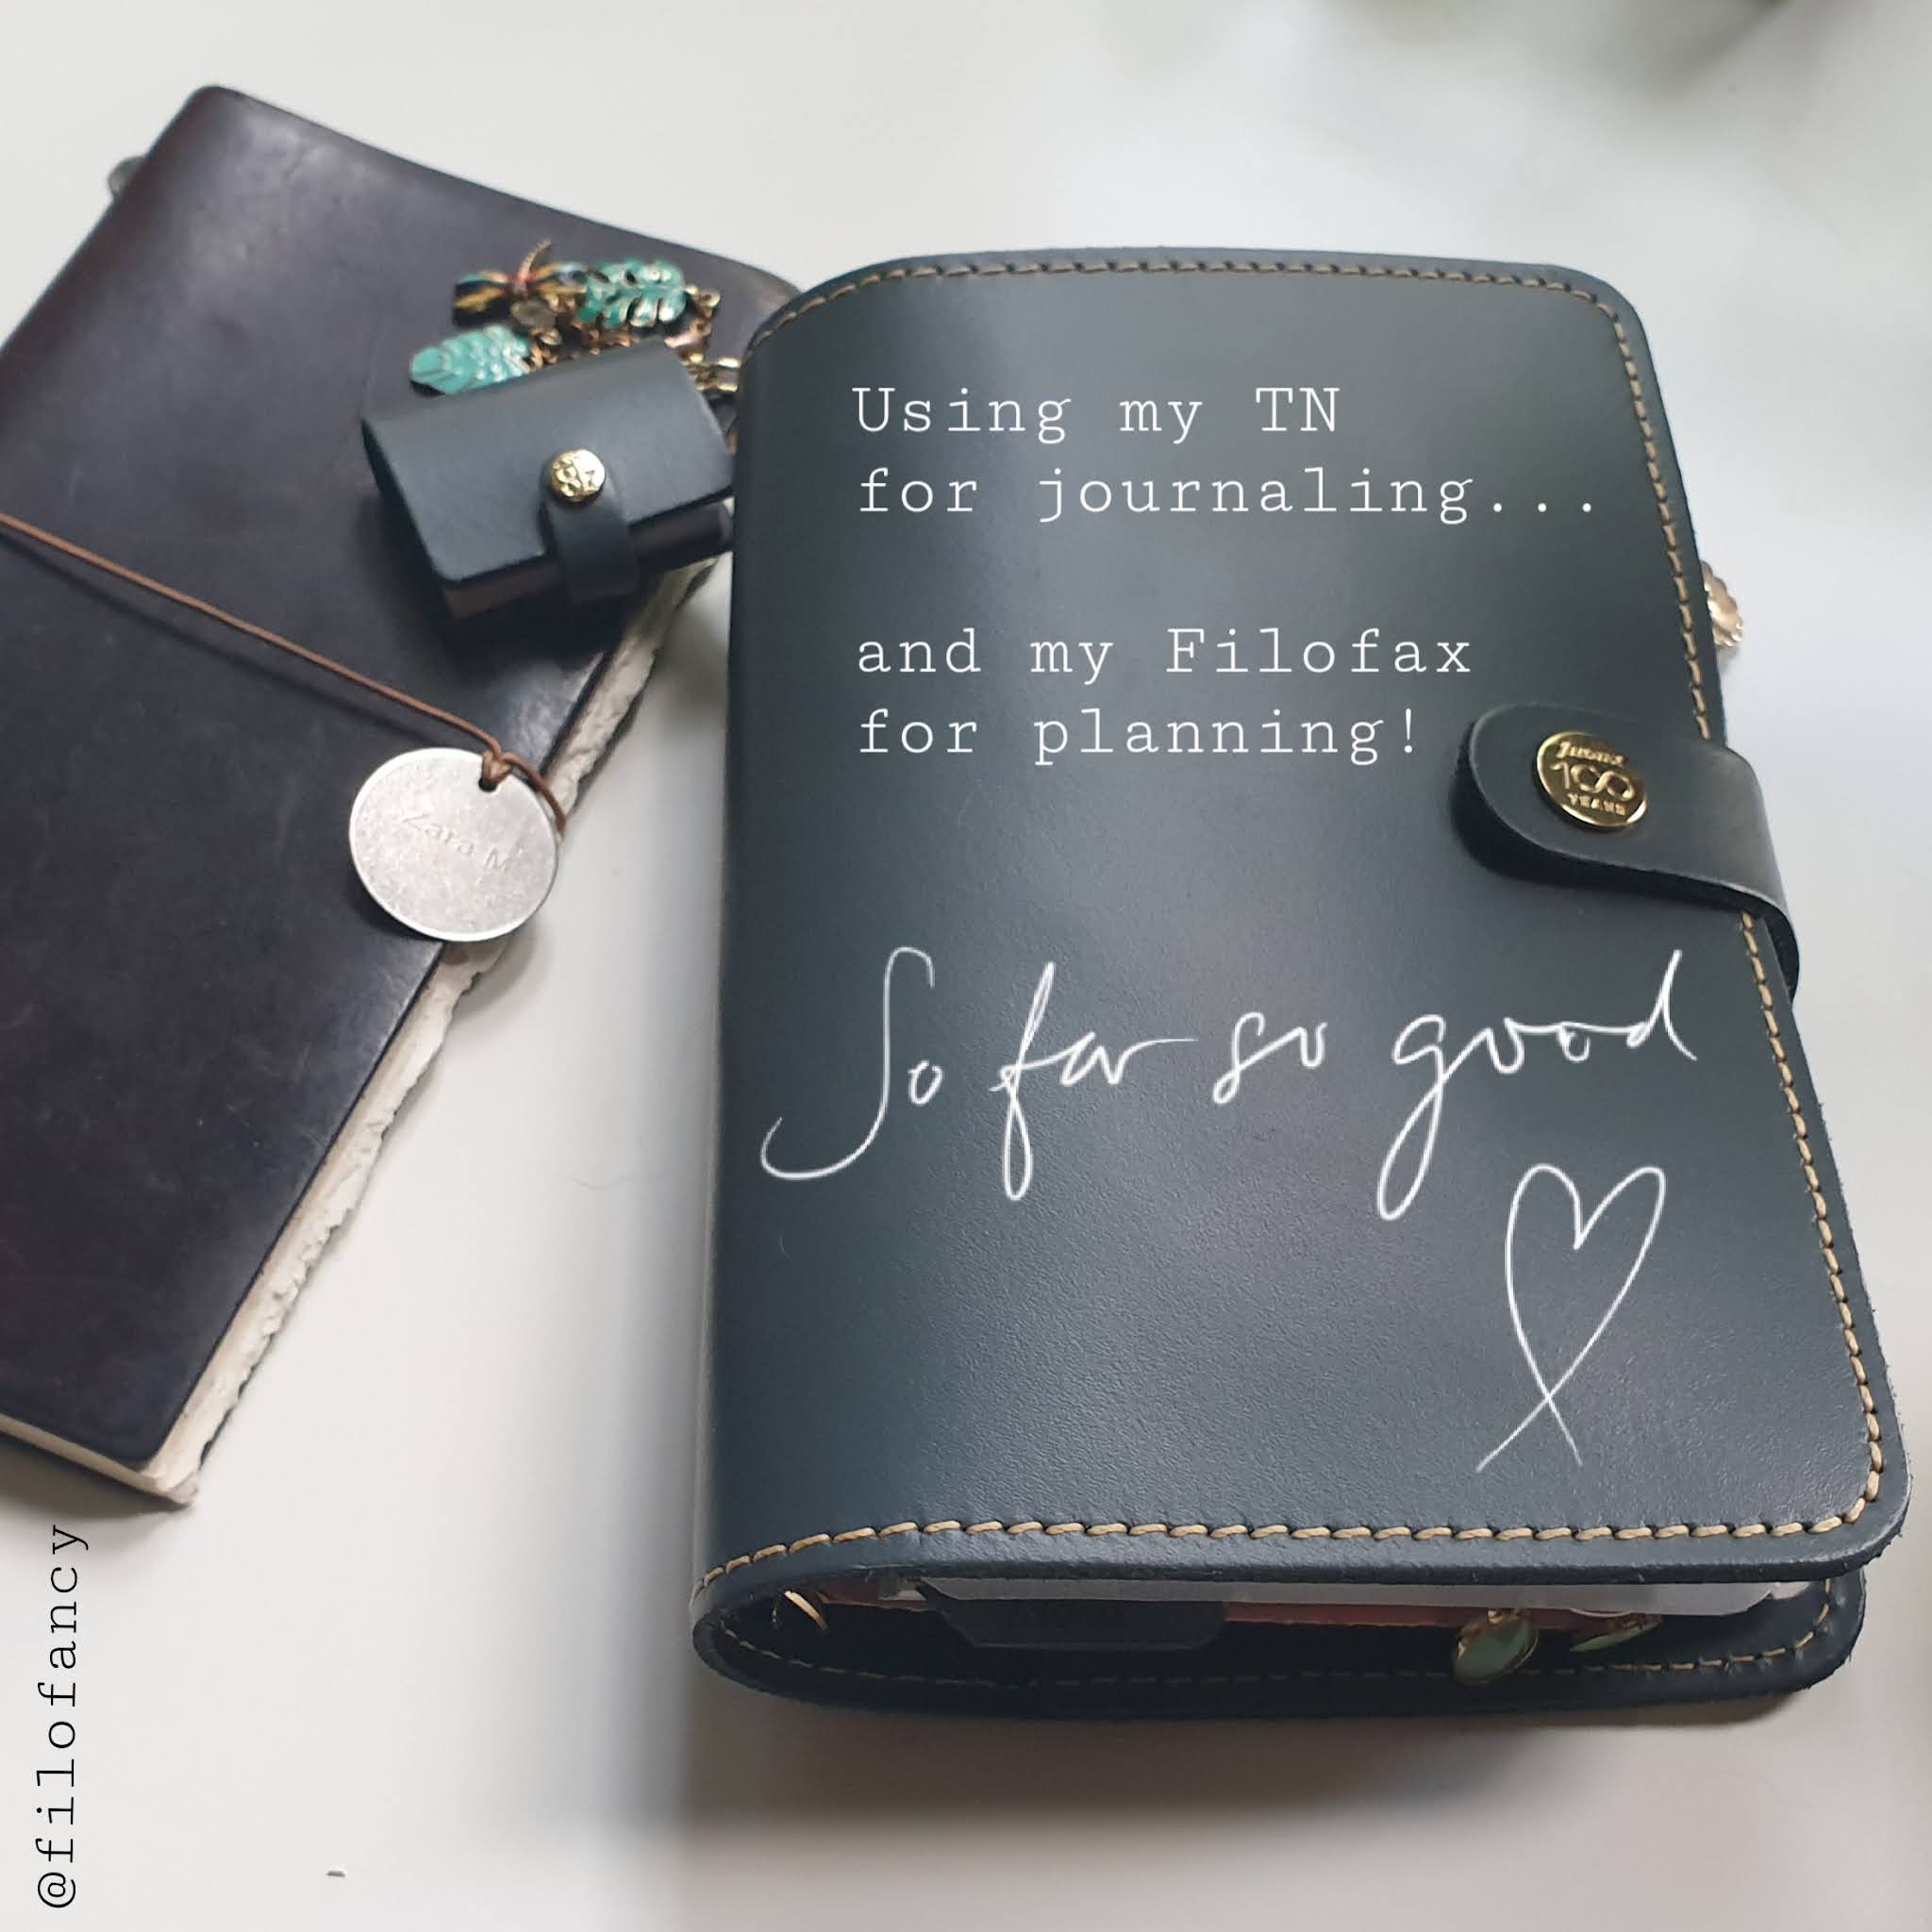 Filofax - A5 or Personal? Which size works best for you